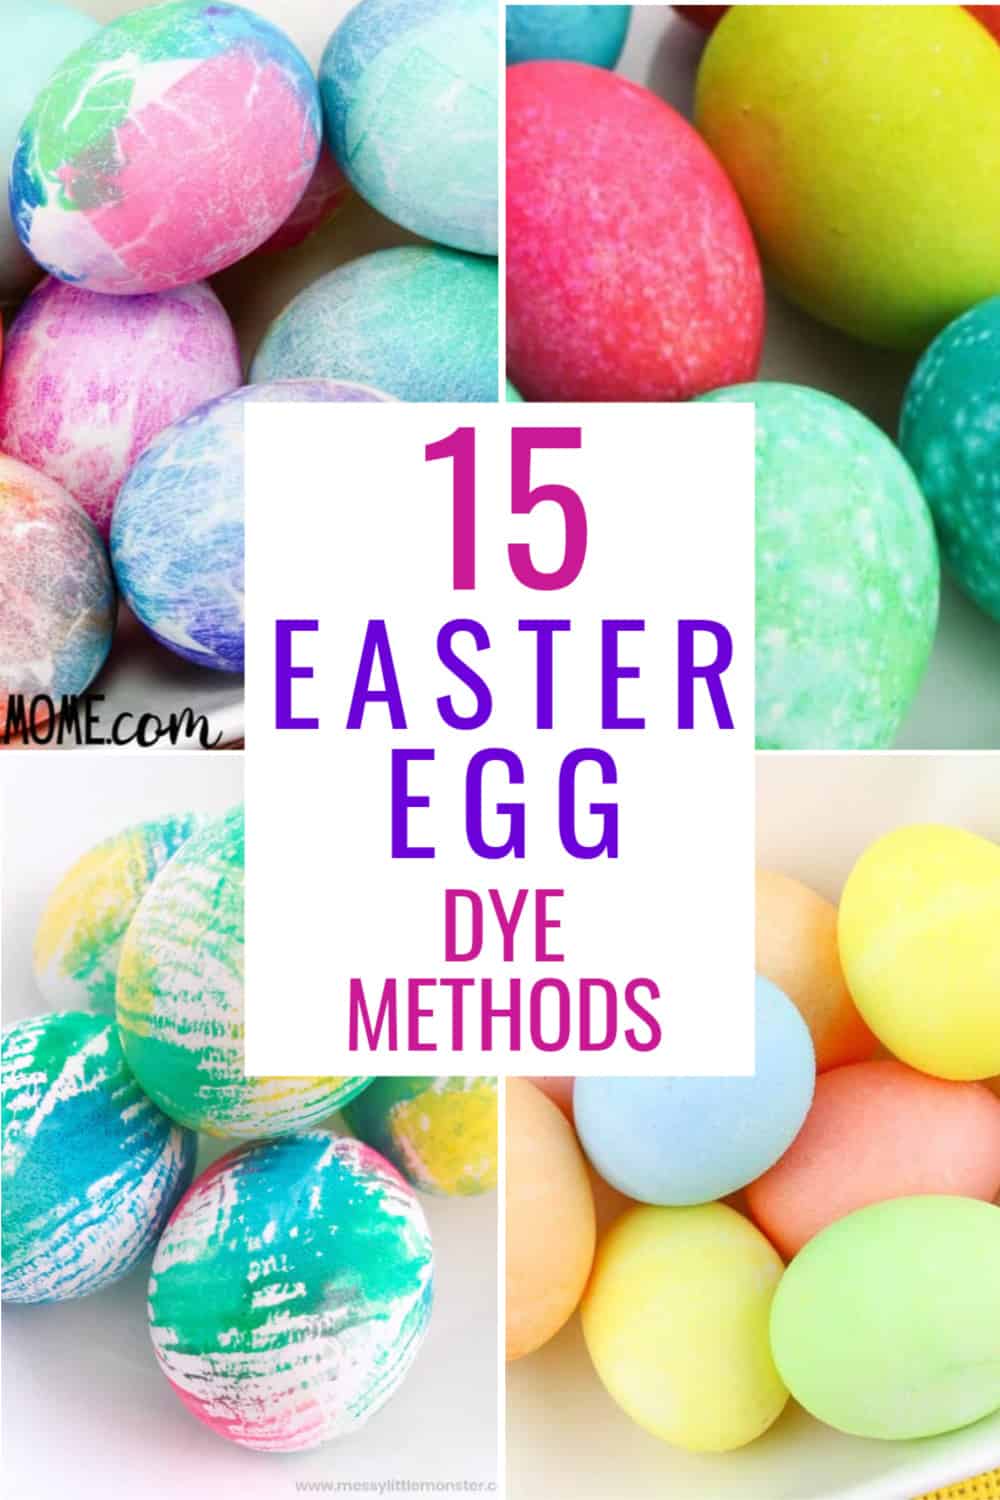 15+ Fun Easter Egg Dying Methods to Try with Your Kids This Year